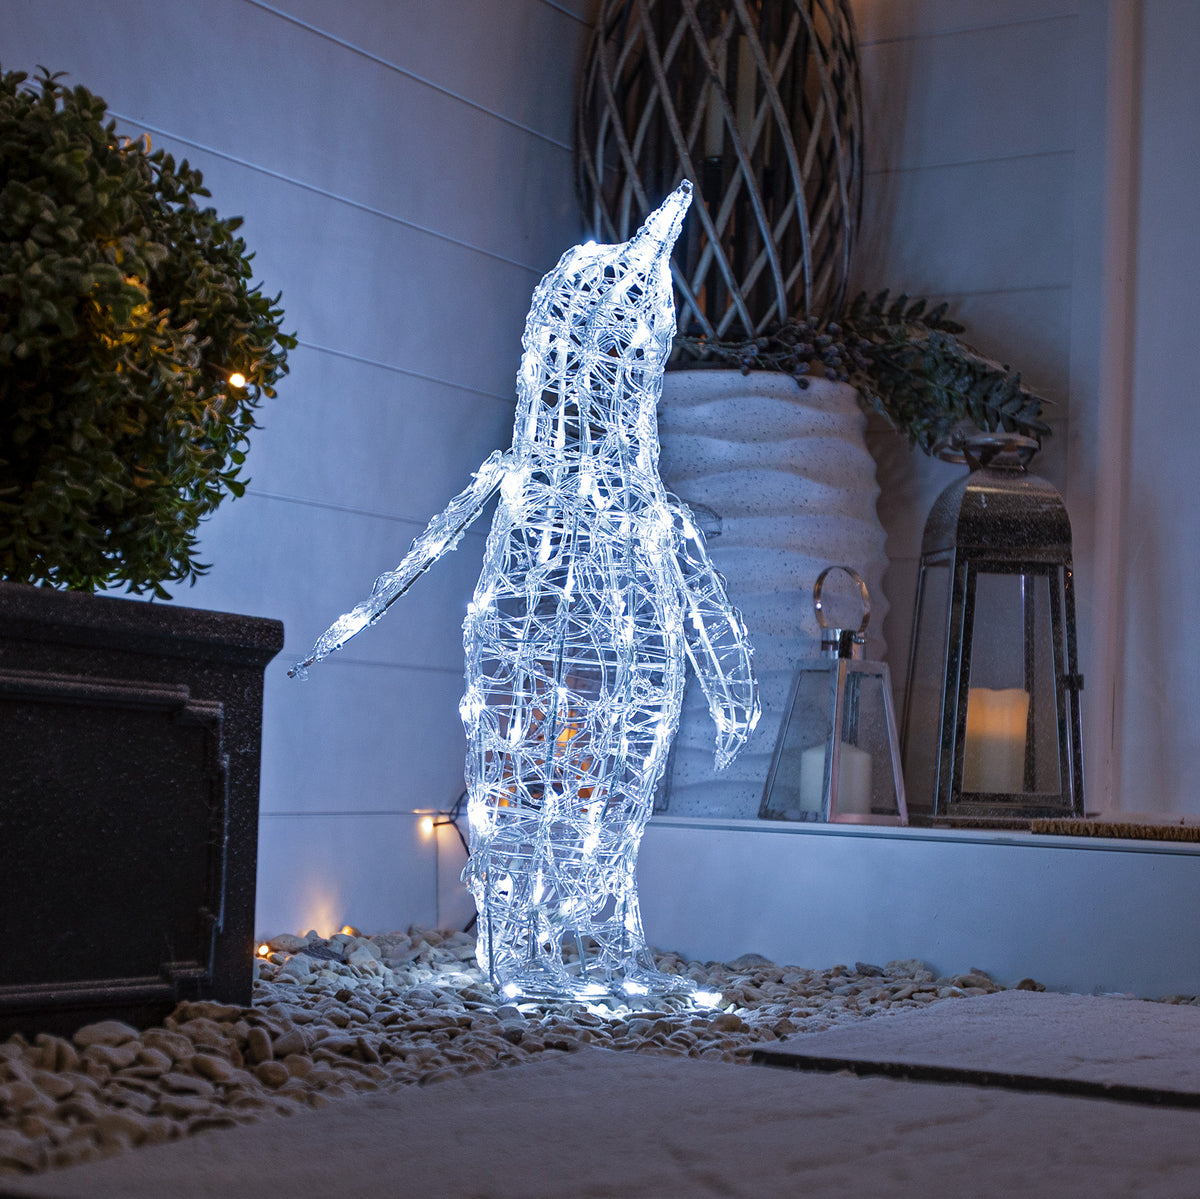 60cm Acrylic Outdoor Light Up Stargazing Christmas Penguin with 80 LEDS